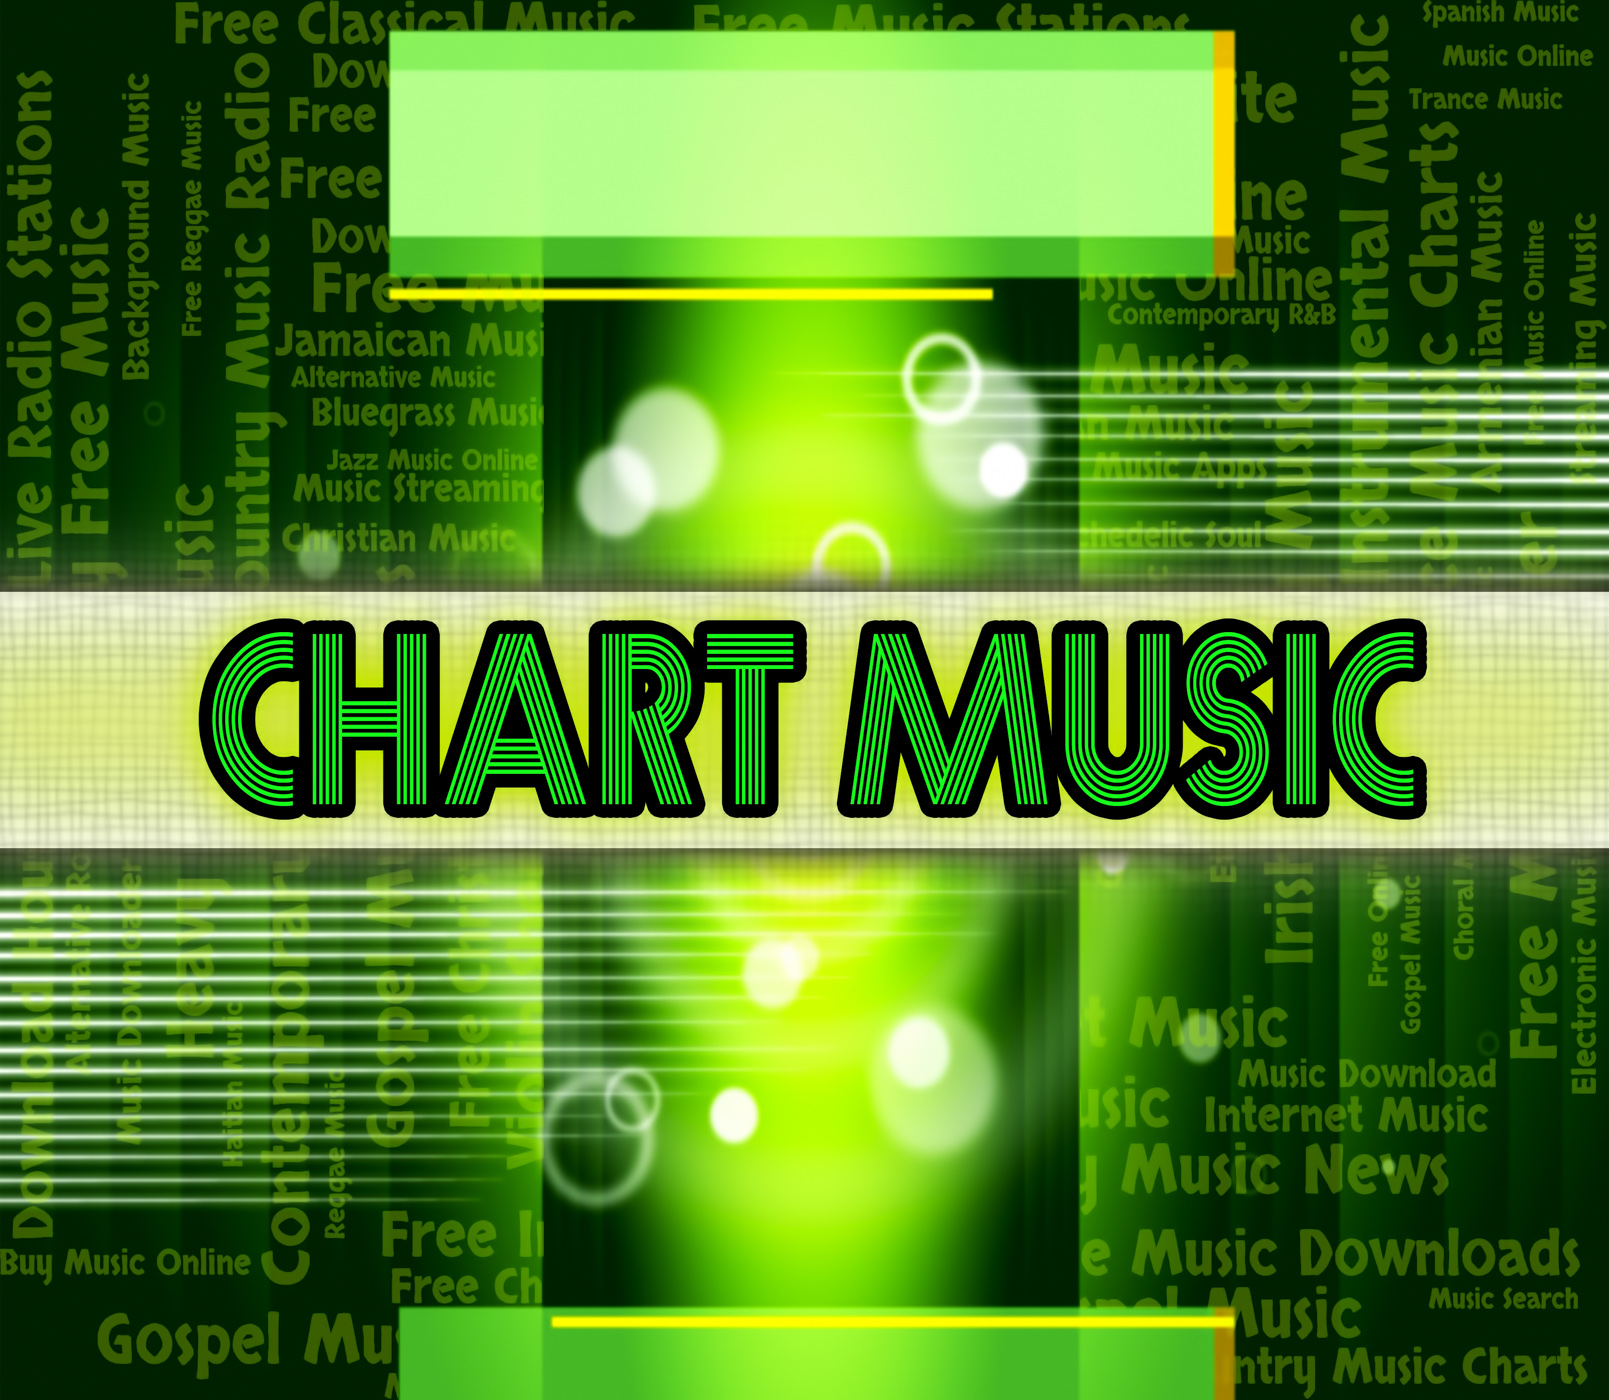 Music charts means best sellers and albums photo